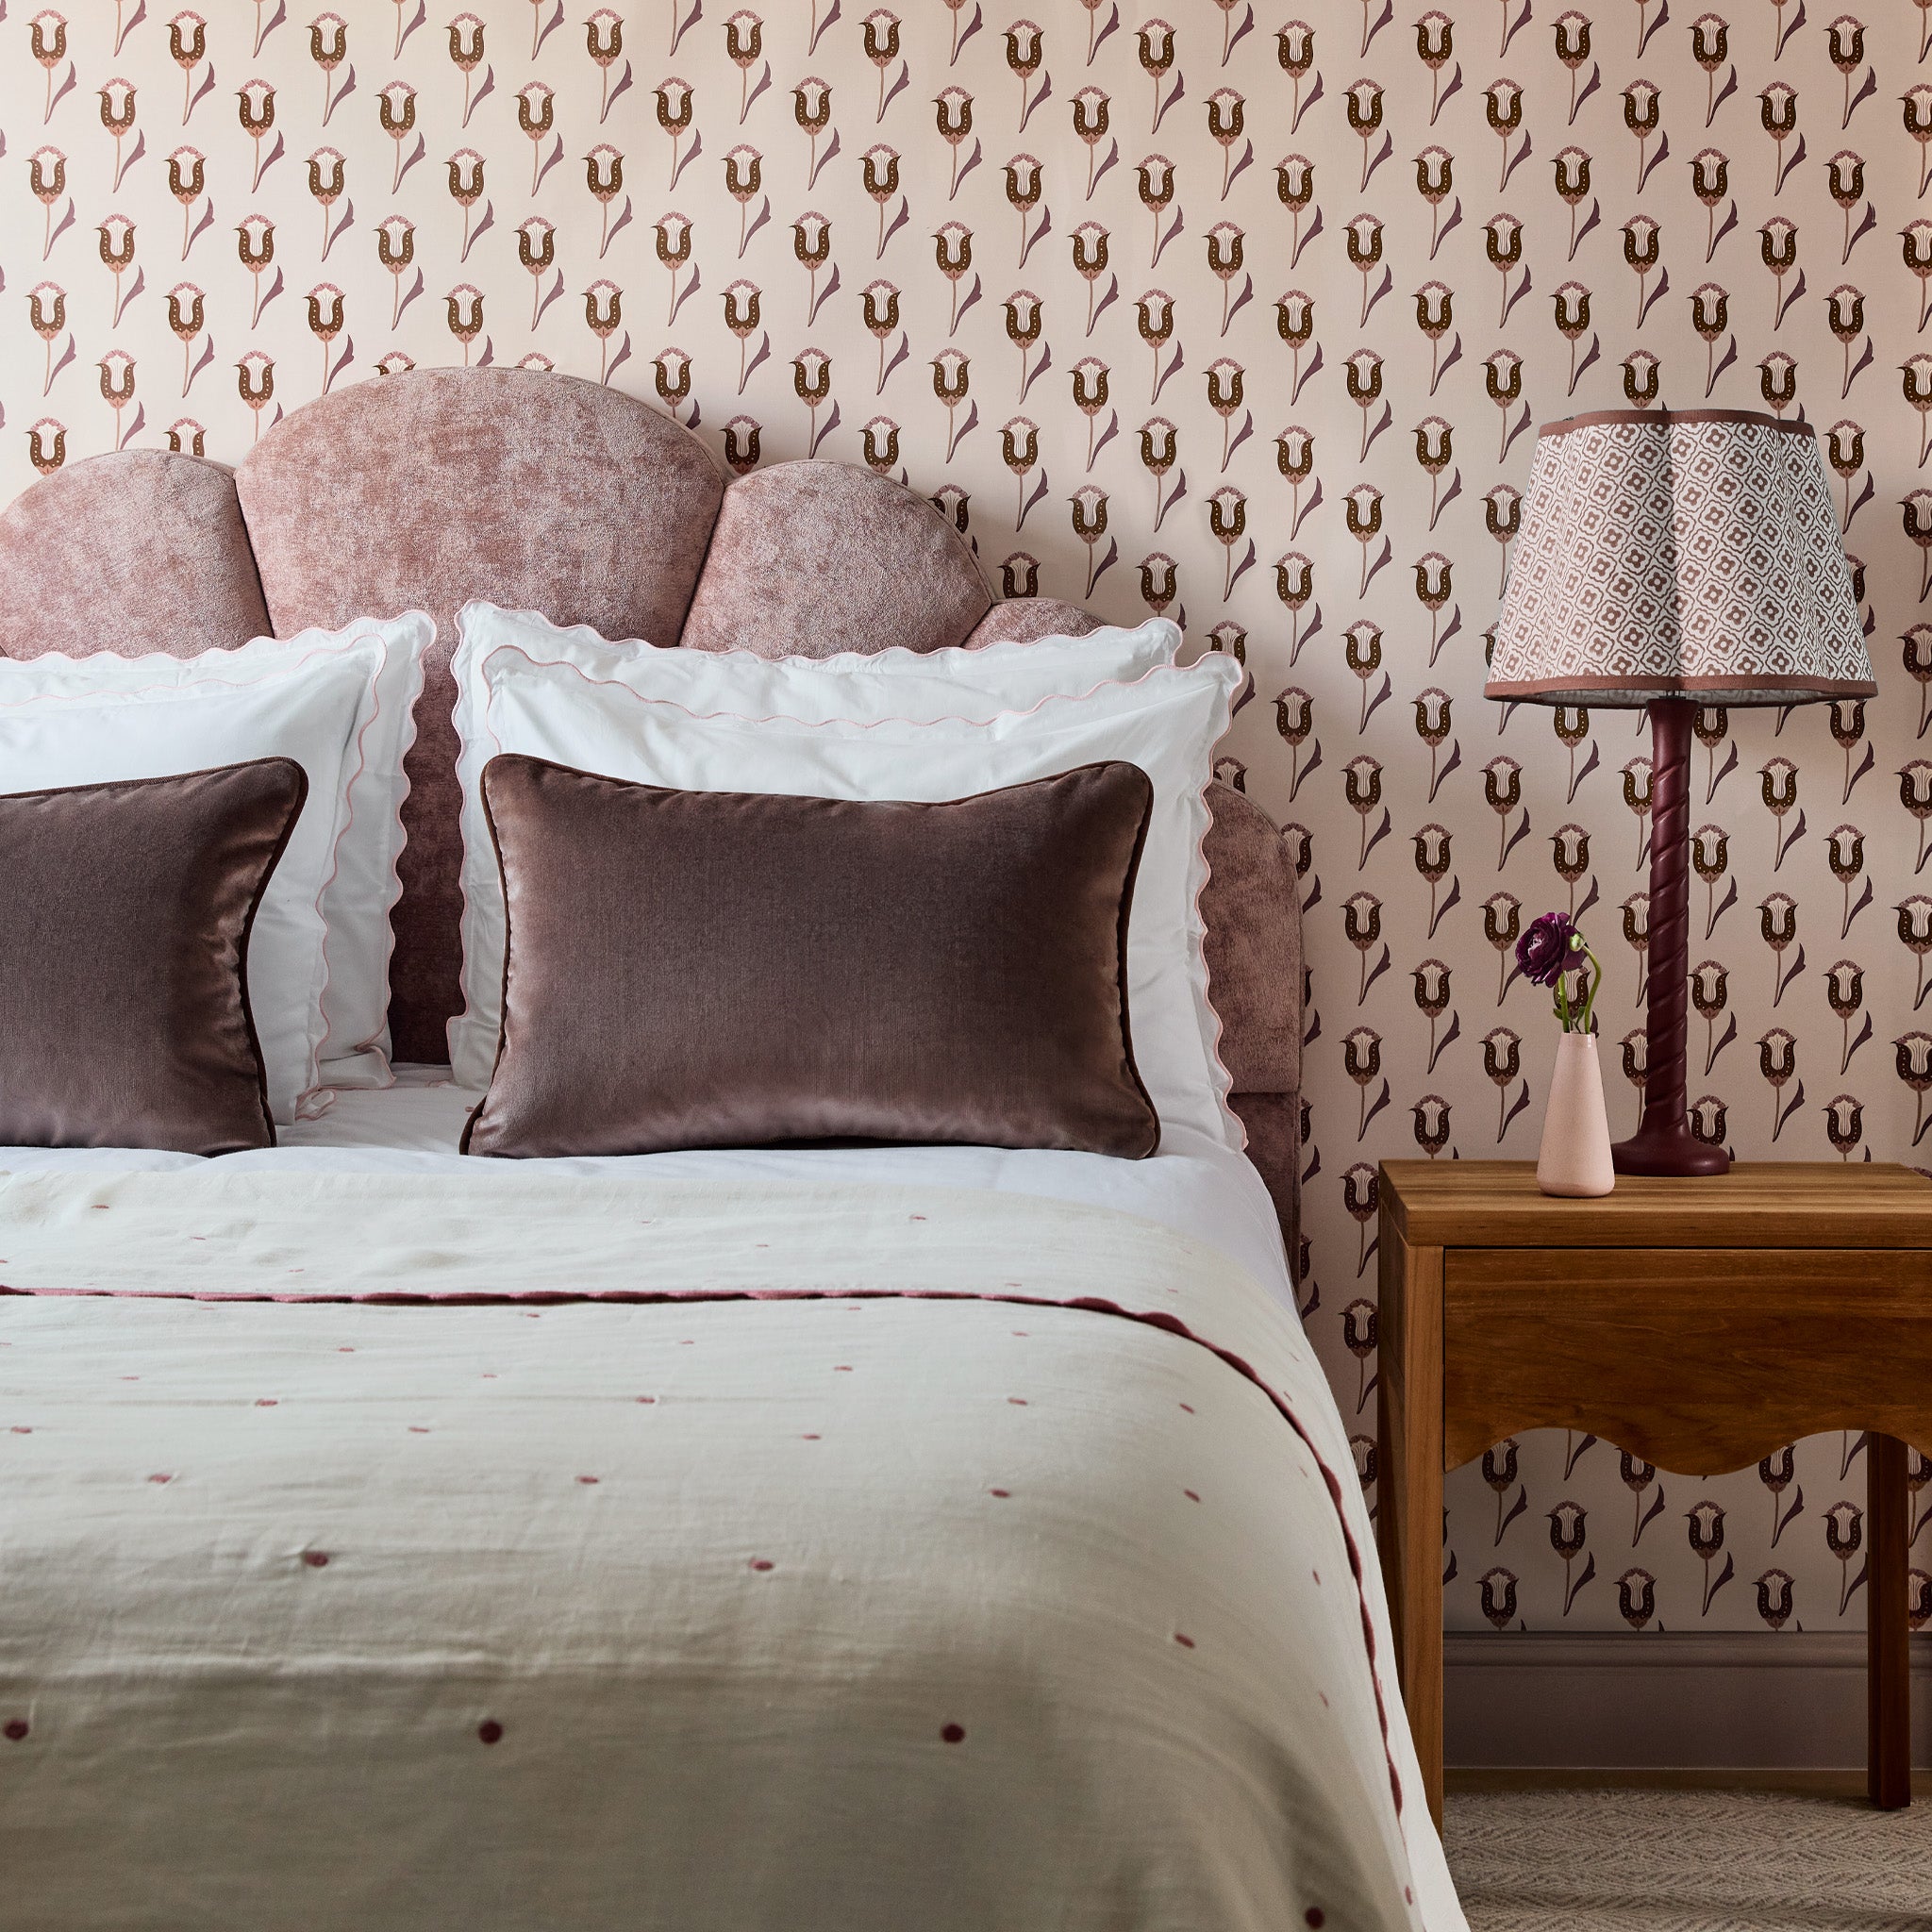 abstract floral neutral background wallpaper with pink and maroon flowers on it and a bed in front of the wall with white polka dot bedding and brown velvet pillows on the bed and a brown wooden night stand next to the bed with a lamp on it 